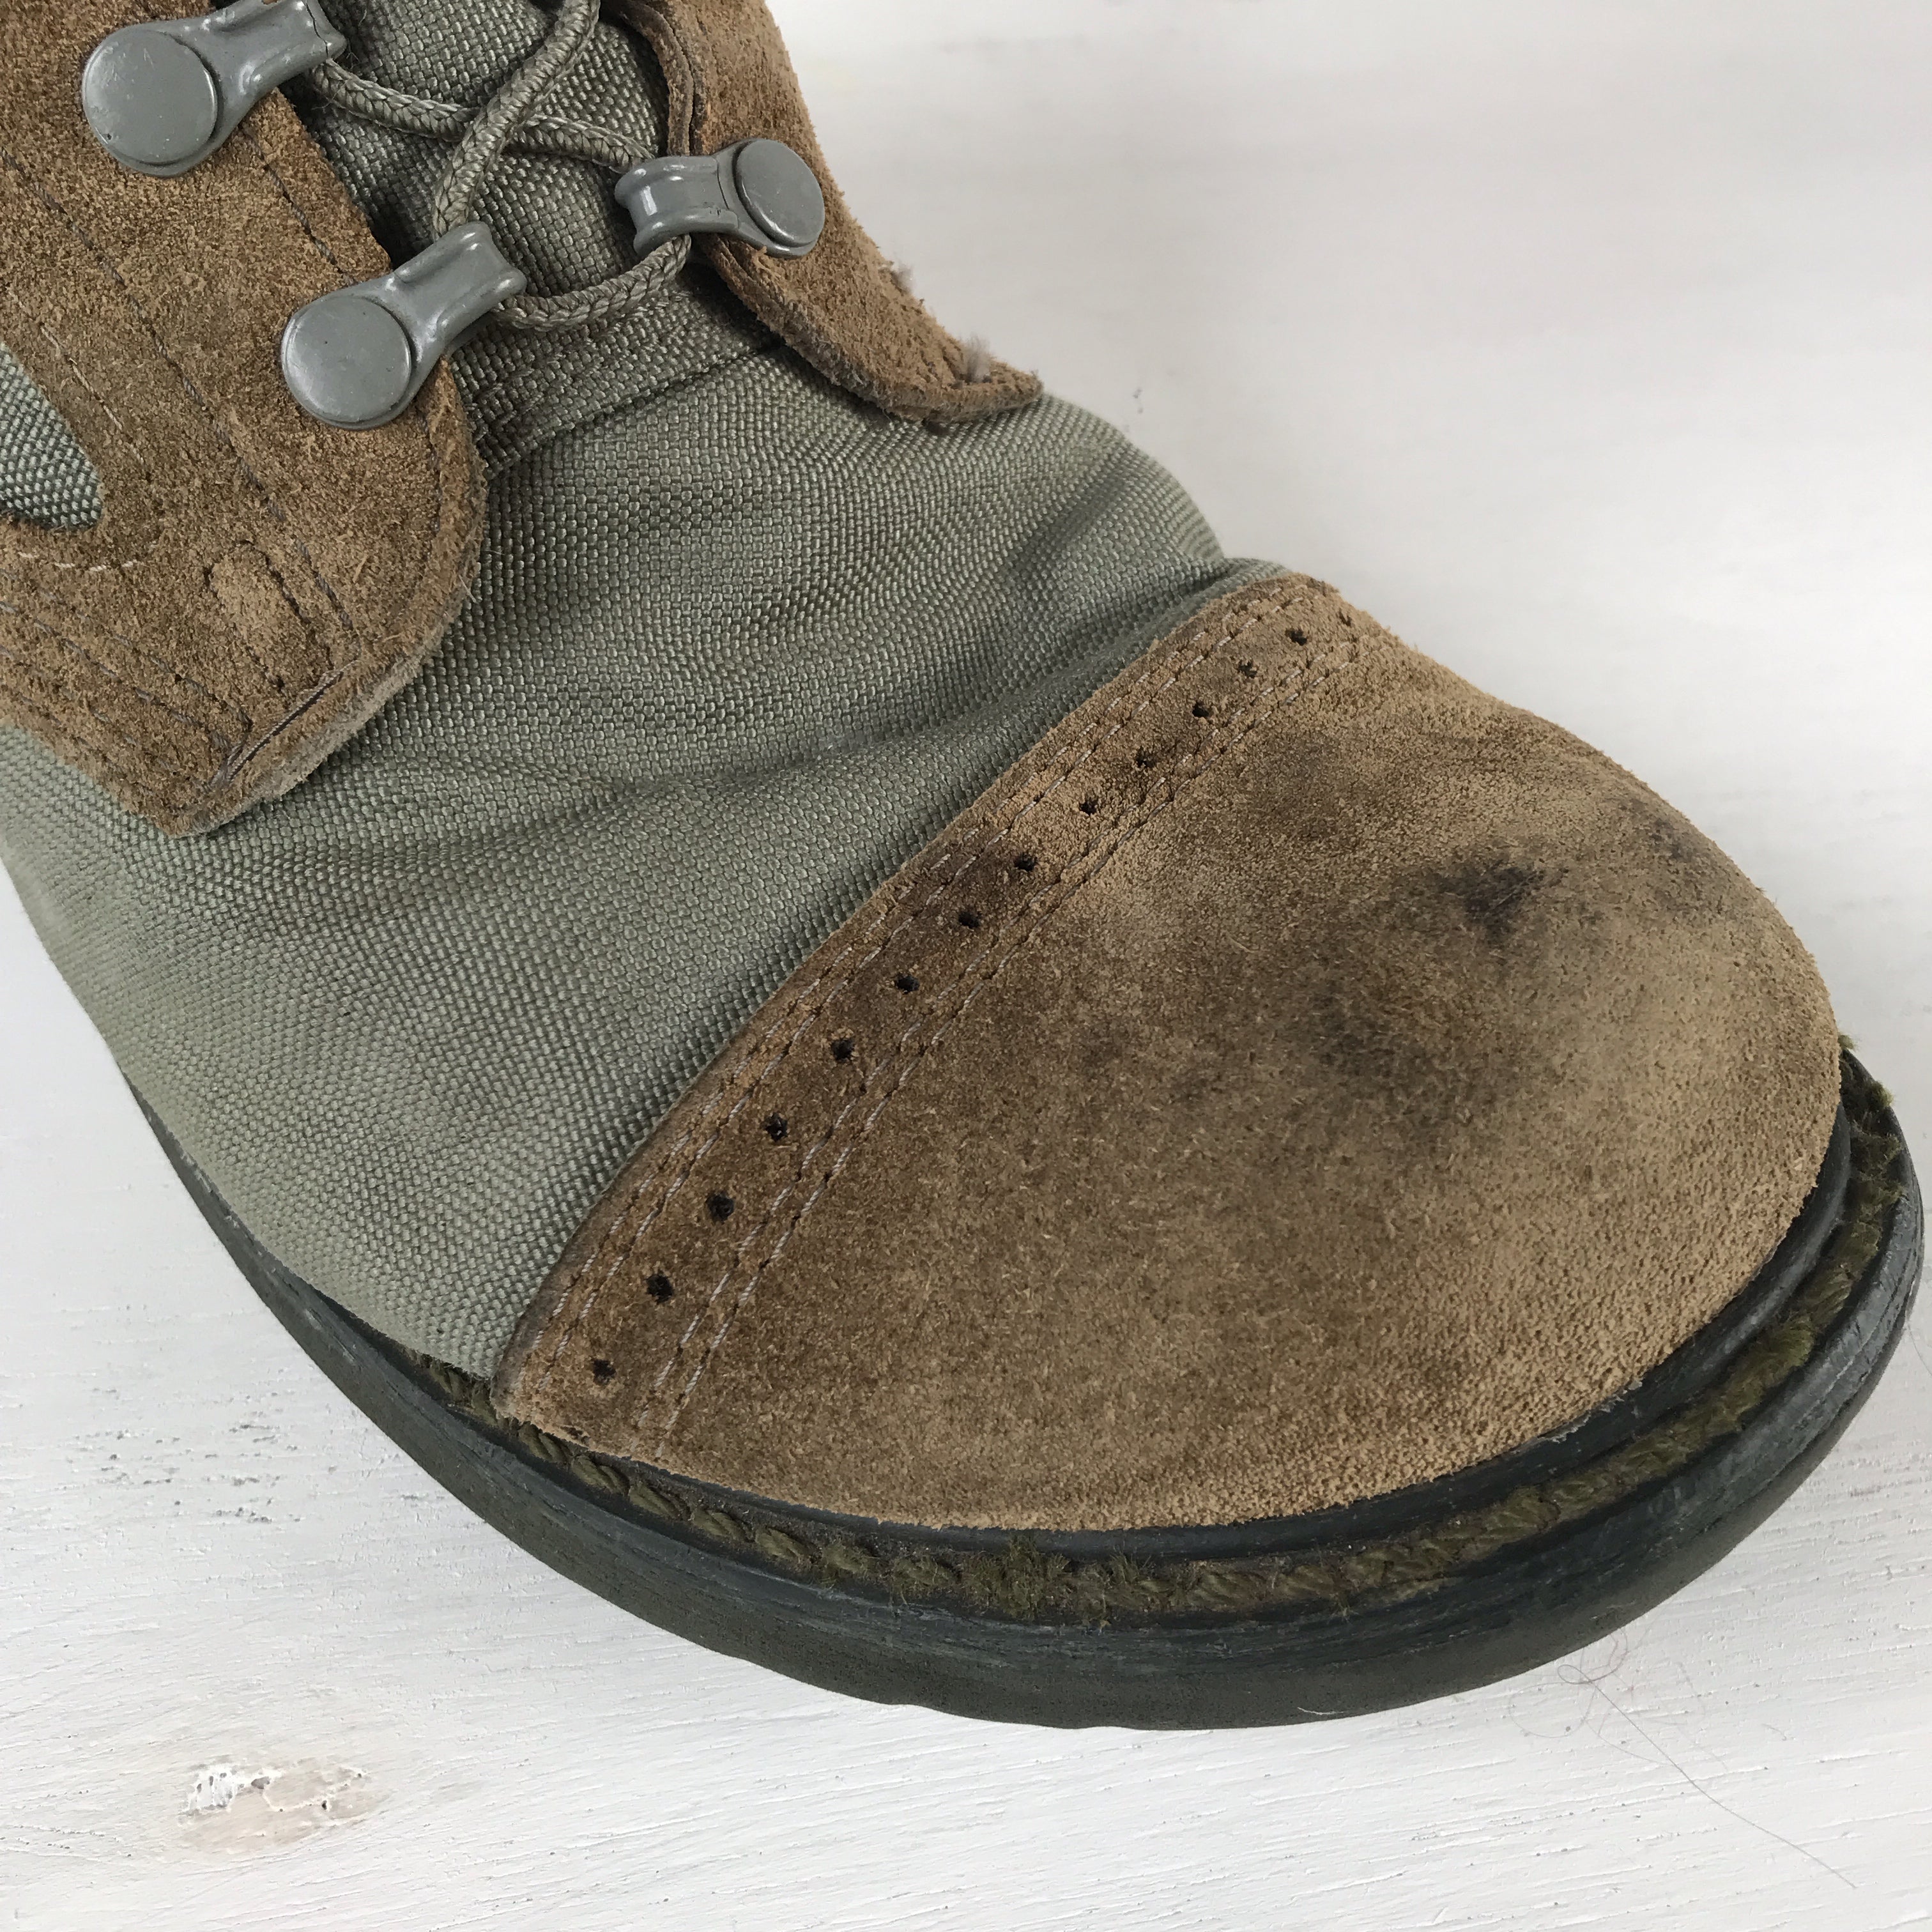 [ ONLY ONE ! ] CORCORAN COMBAT BOOTS FOLIAGE/ U.S.MILITARY